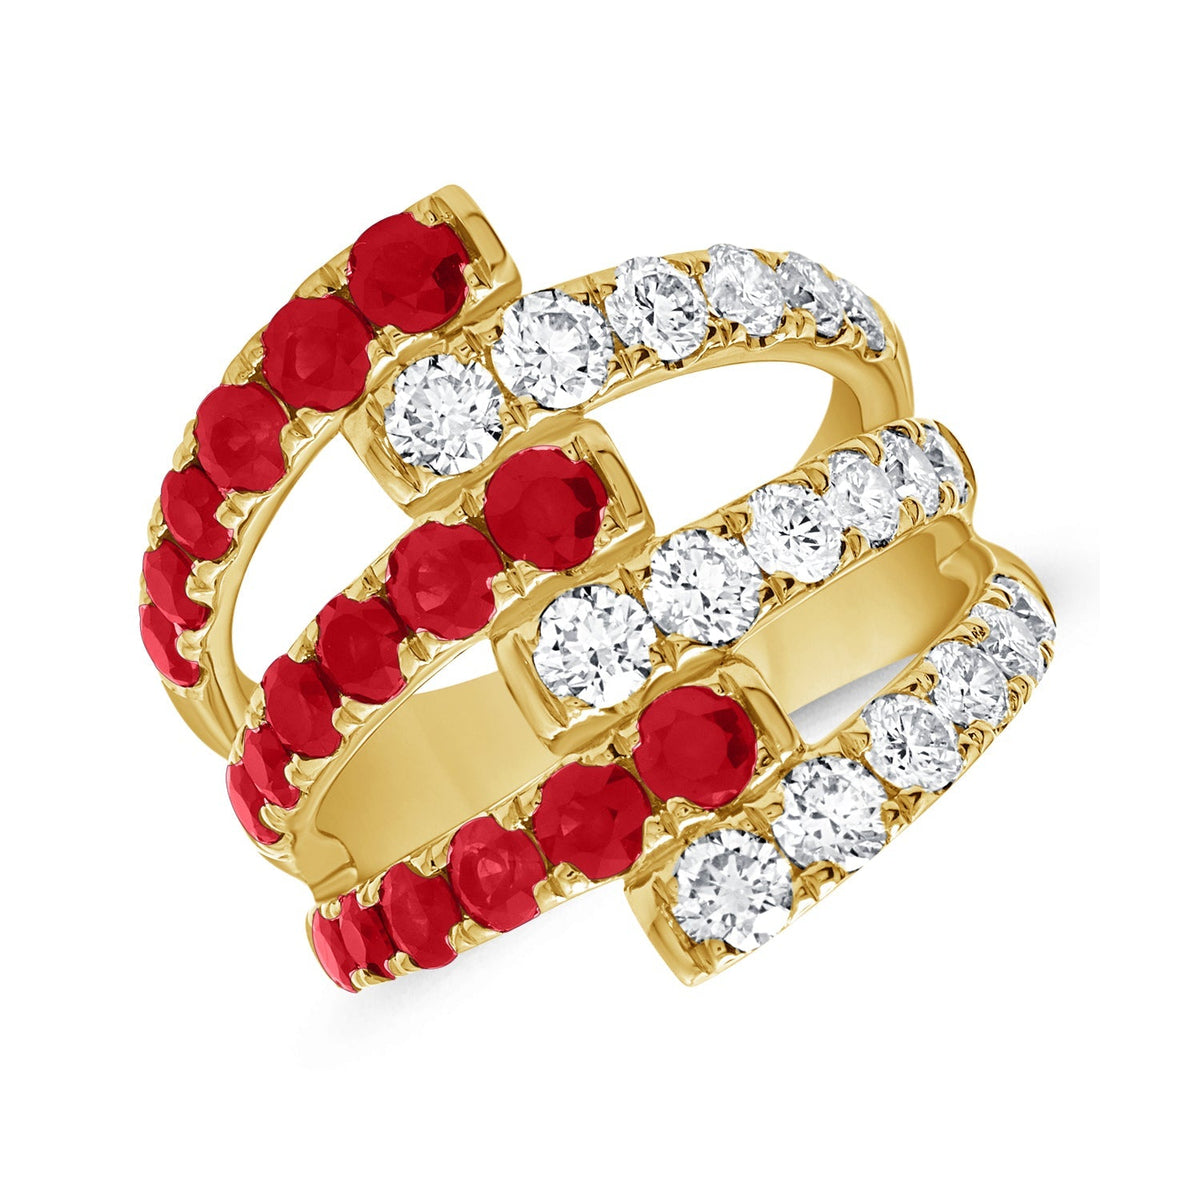 14K Yellow Gold with Diamonds and Rubies, for elegant moments.  14K Yellow Gold weight: 4.82 grams 18 Diamonds 18 Rubies